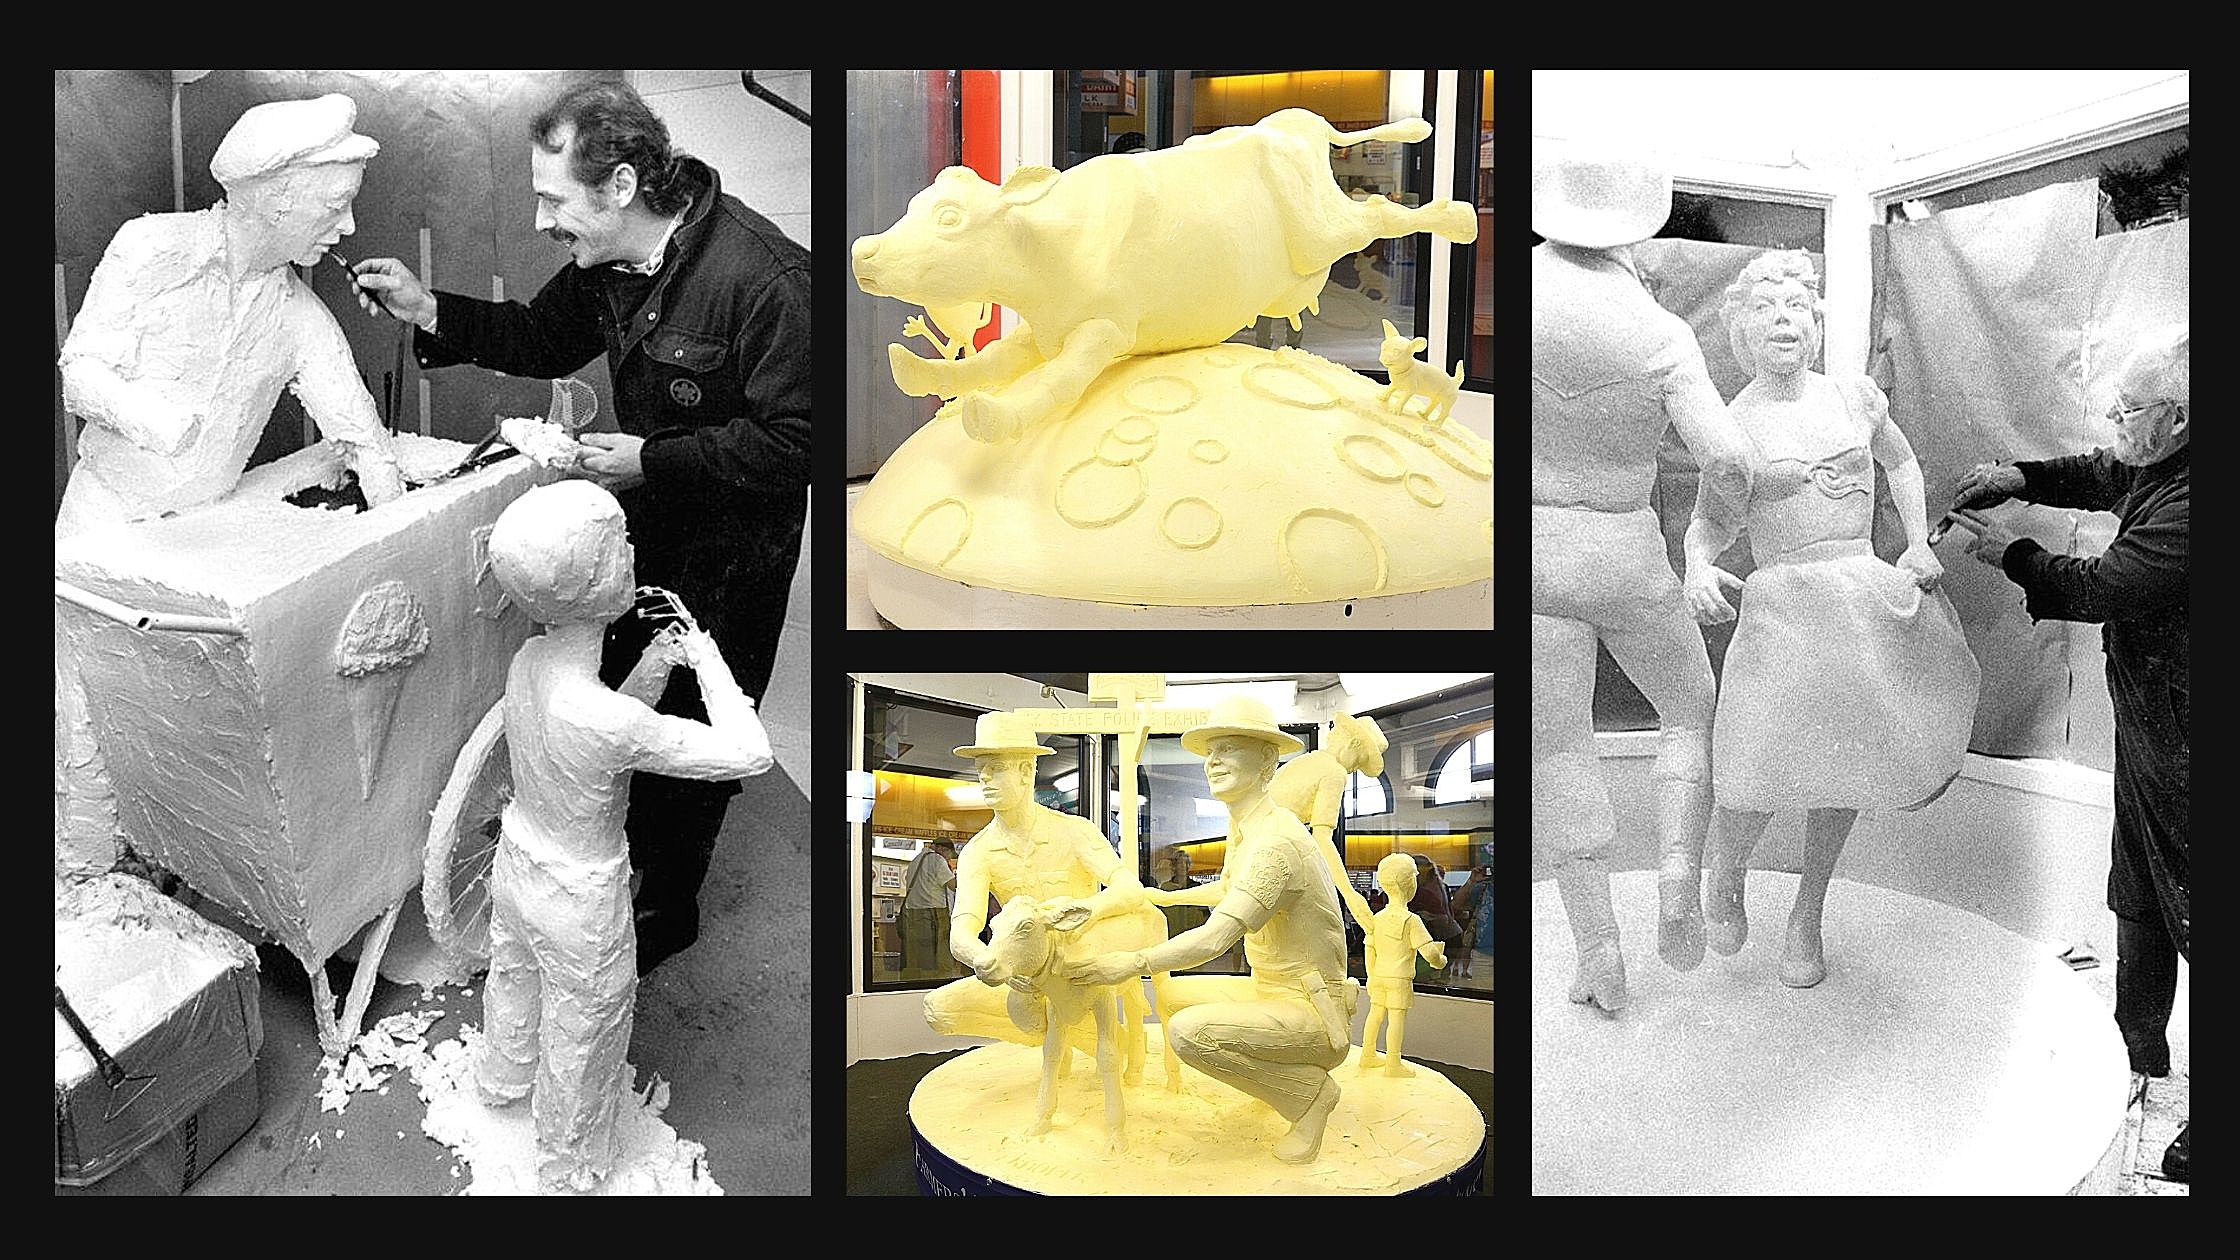 Photos: 10 years of New York State Fair butter sculptures